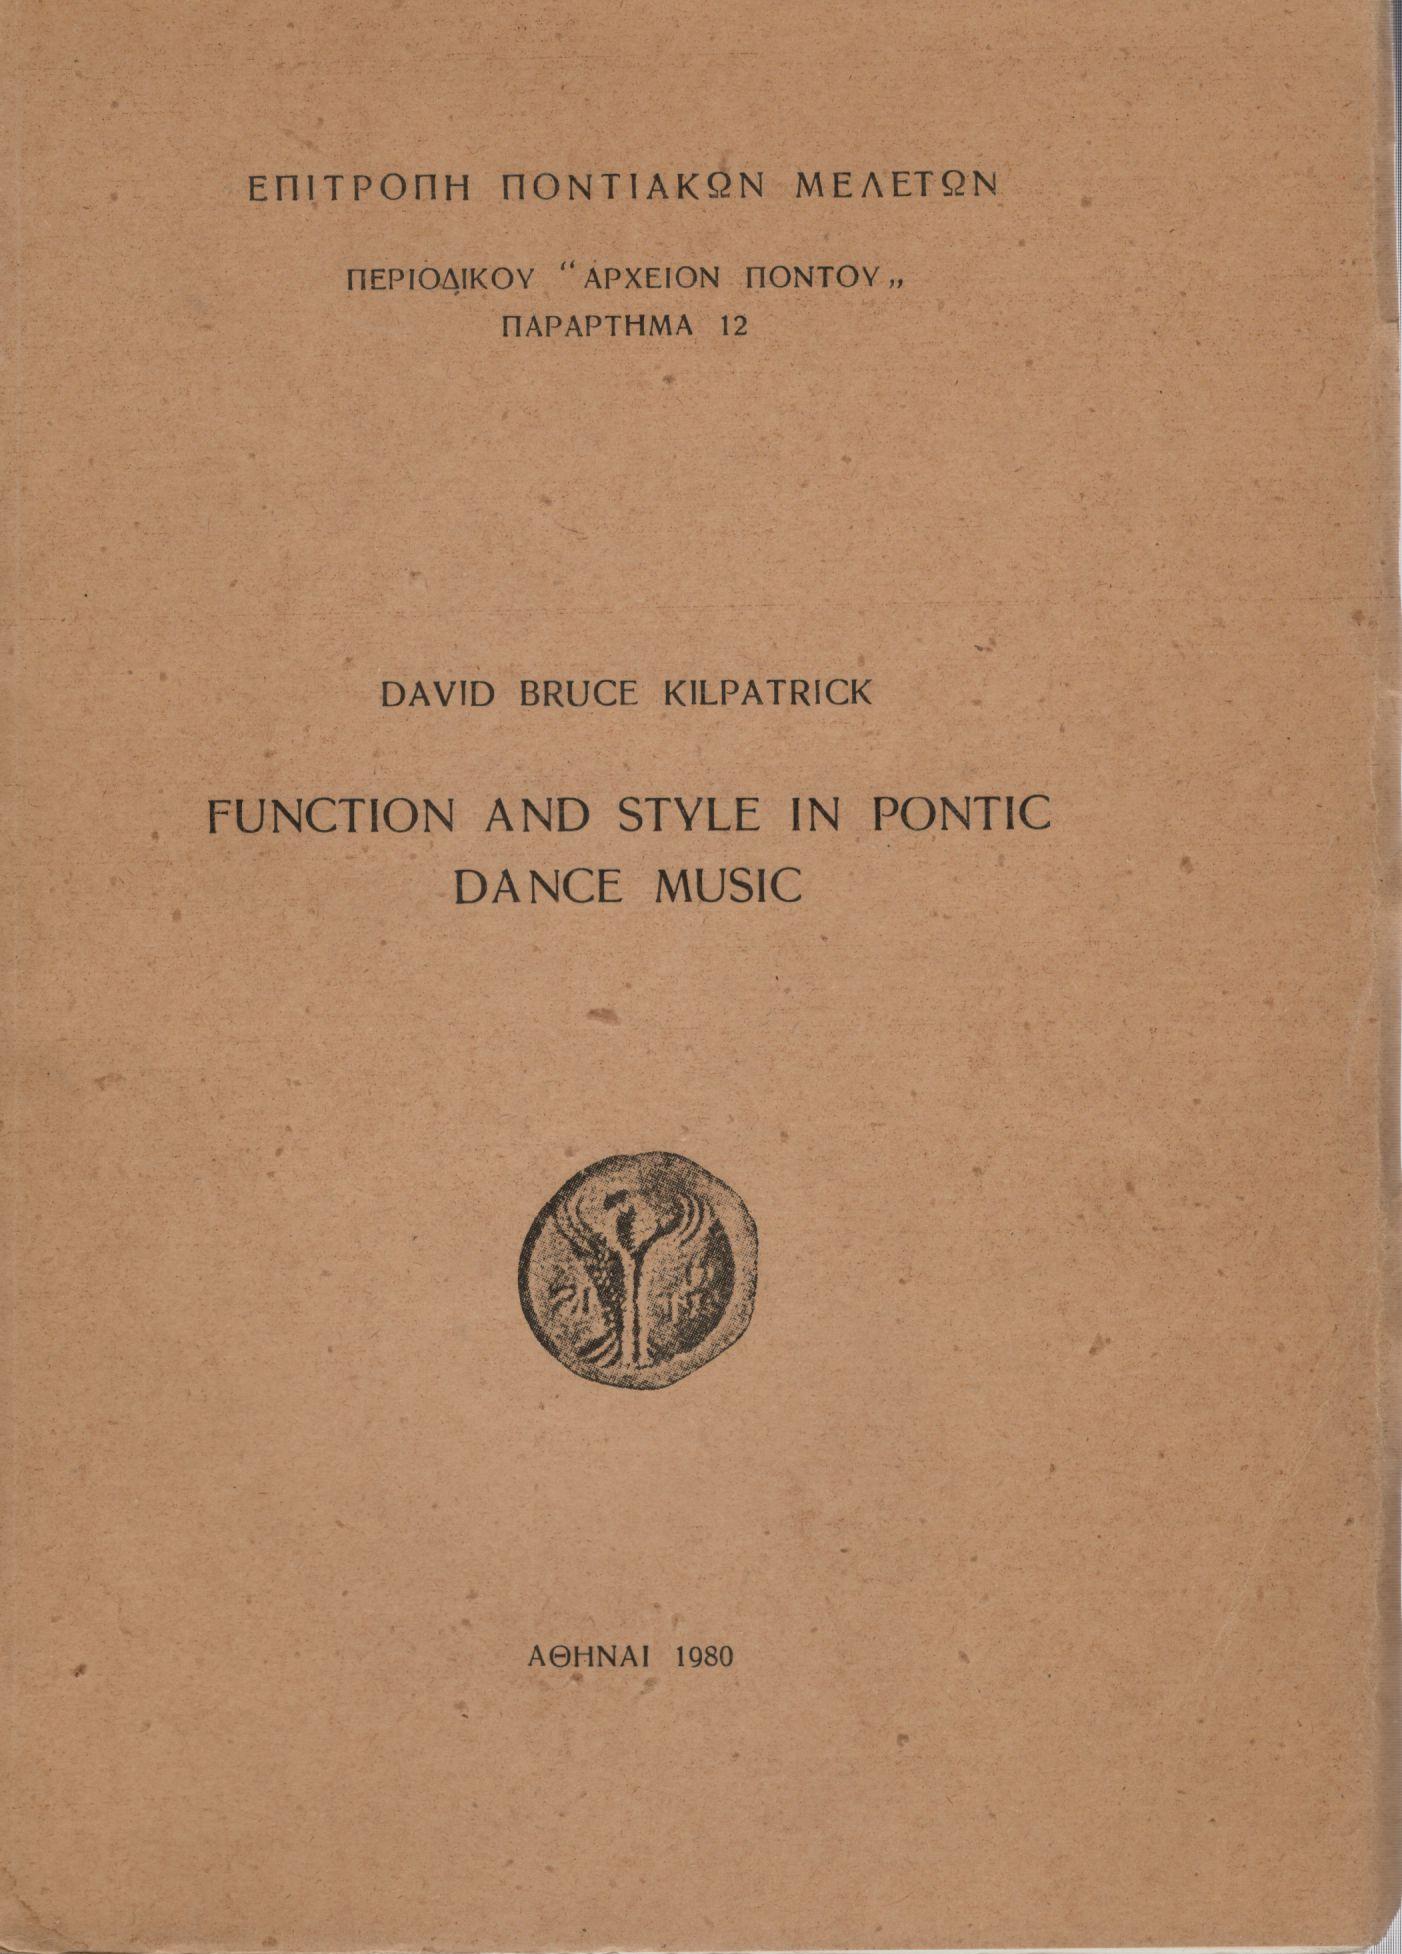 FUNCTION AND STYLE IN PONTIC DANCE MUSIC